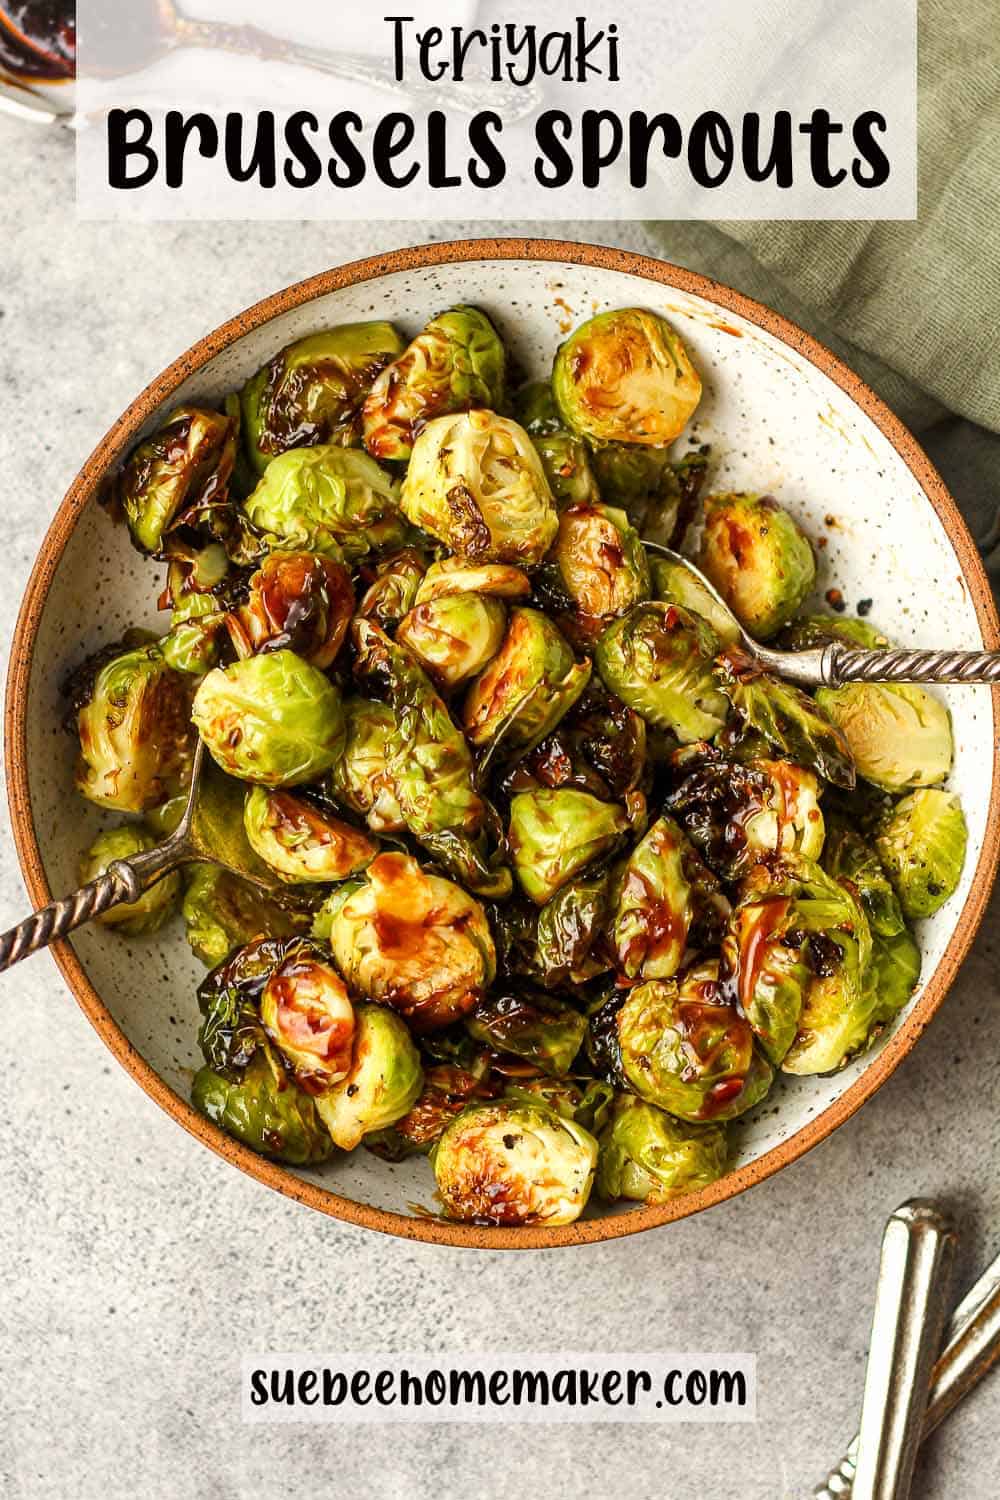 A bowl of teriyaki brussels sprouts.